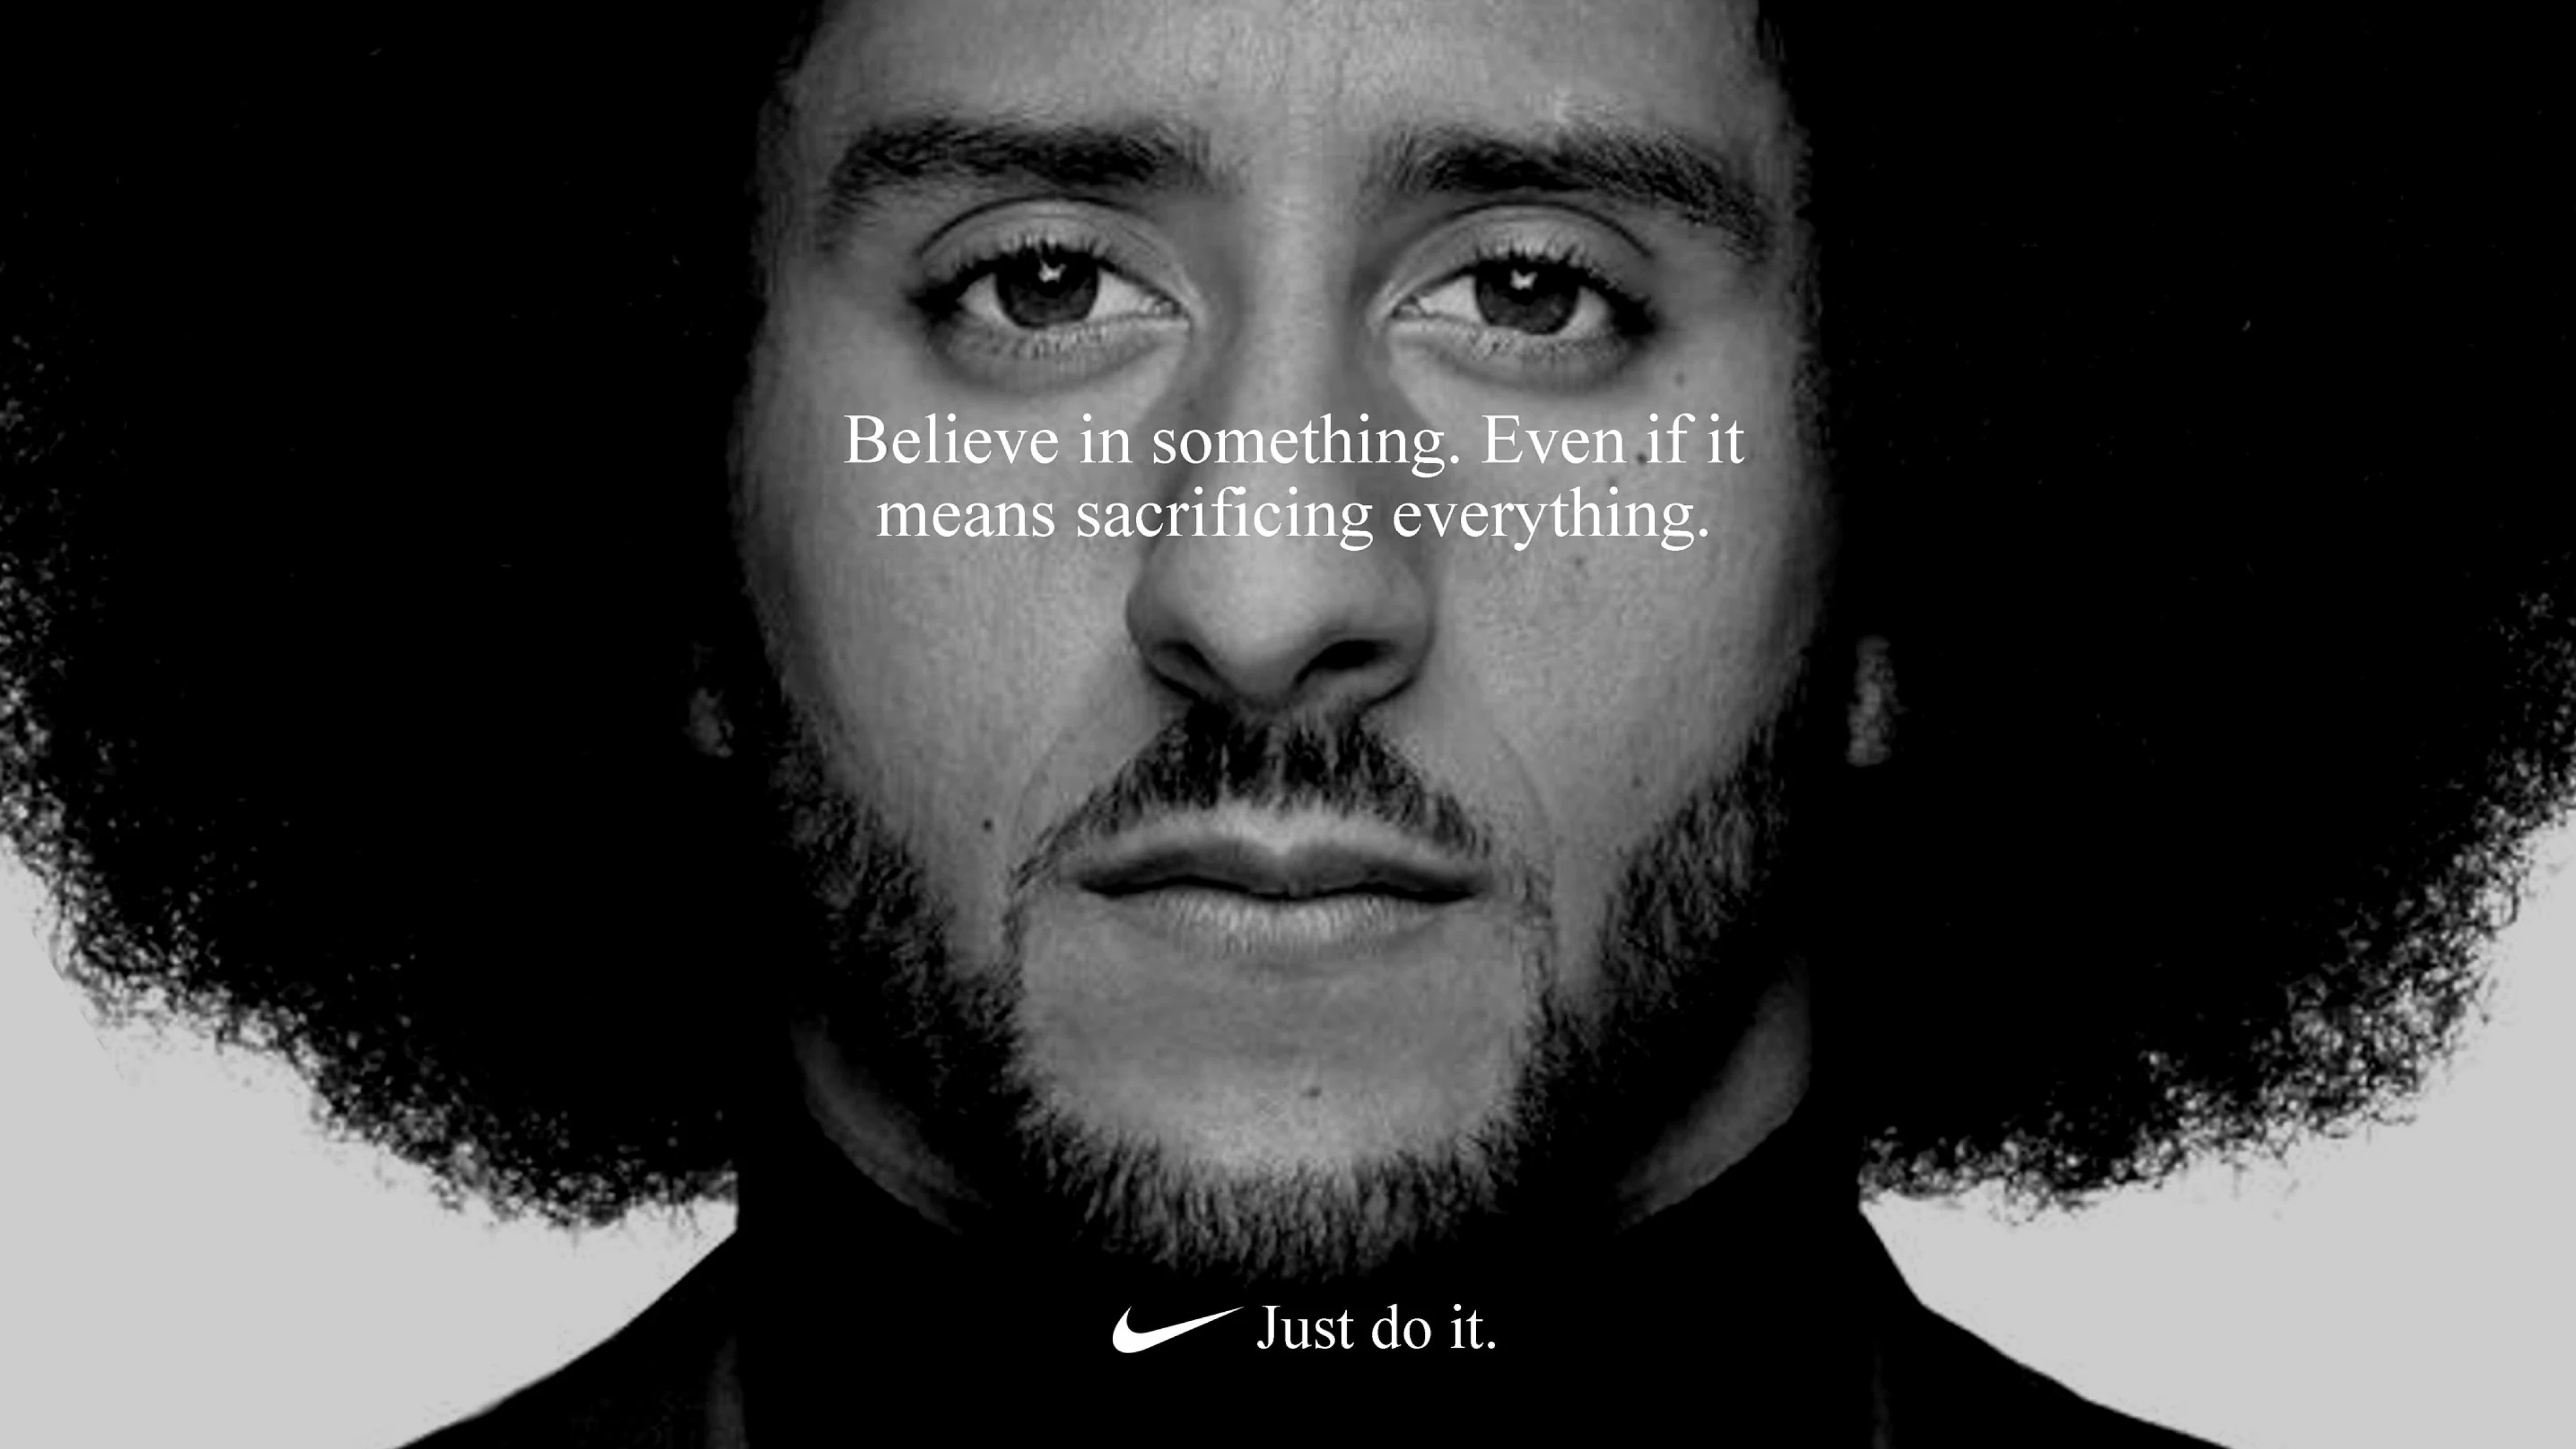 Exemplifies “Just Do It” Ethos With Colin Kaepernick Campaign